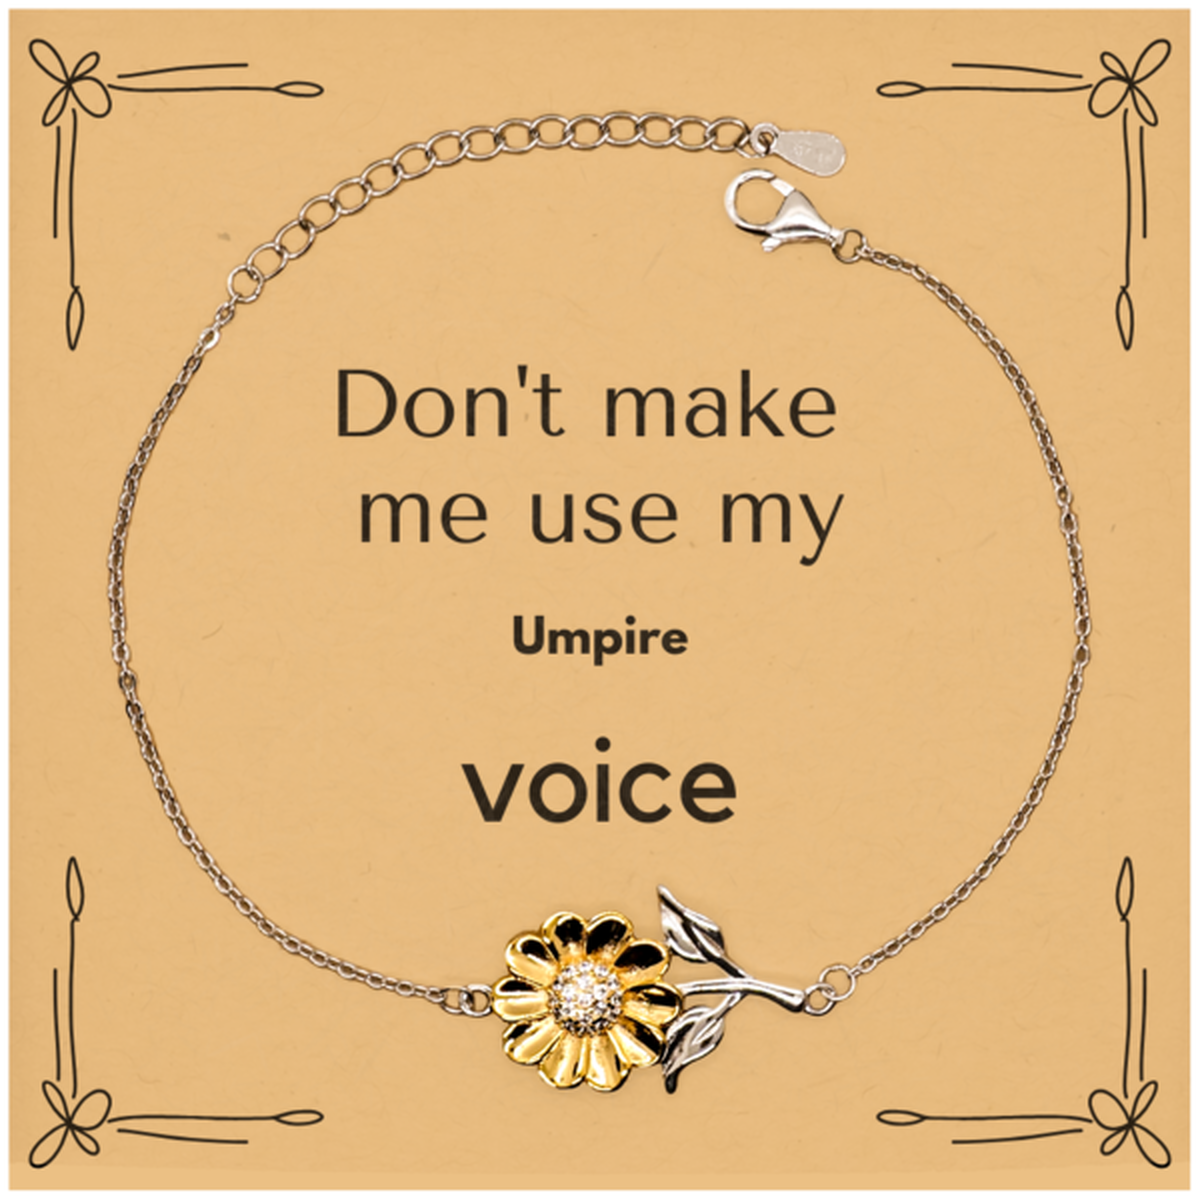 Don't make me use my Umpire voice, Sarcasm Umpire Card Gifts, Christmas Umpire Sunflower Bracelet Birthday Unique Gifts For Umpire Coworkers, Men, Women, Colleague, Friends